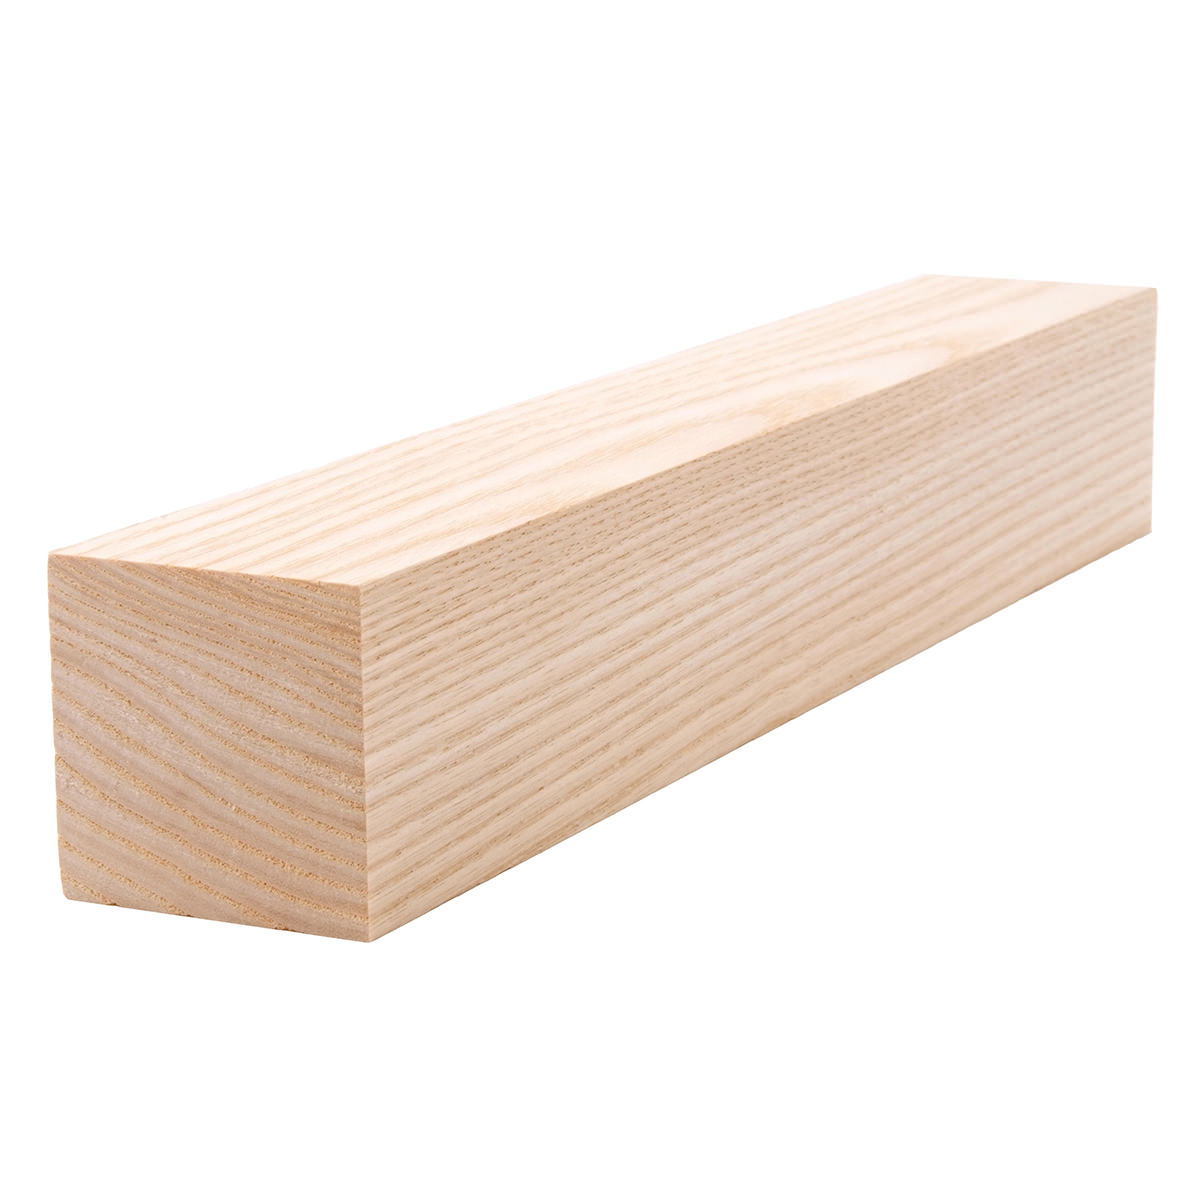 2x2 (13/4" x 13/4") Ash S4S Lumber & Square Stock from Baird Brothers